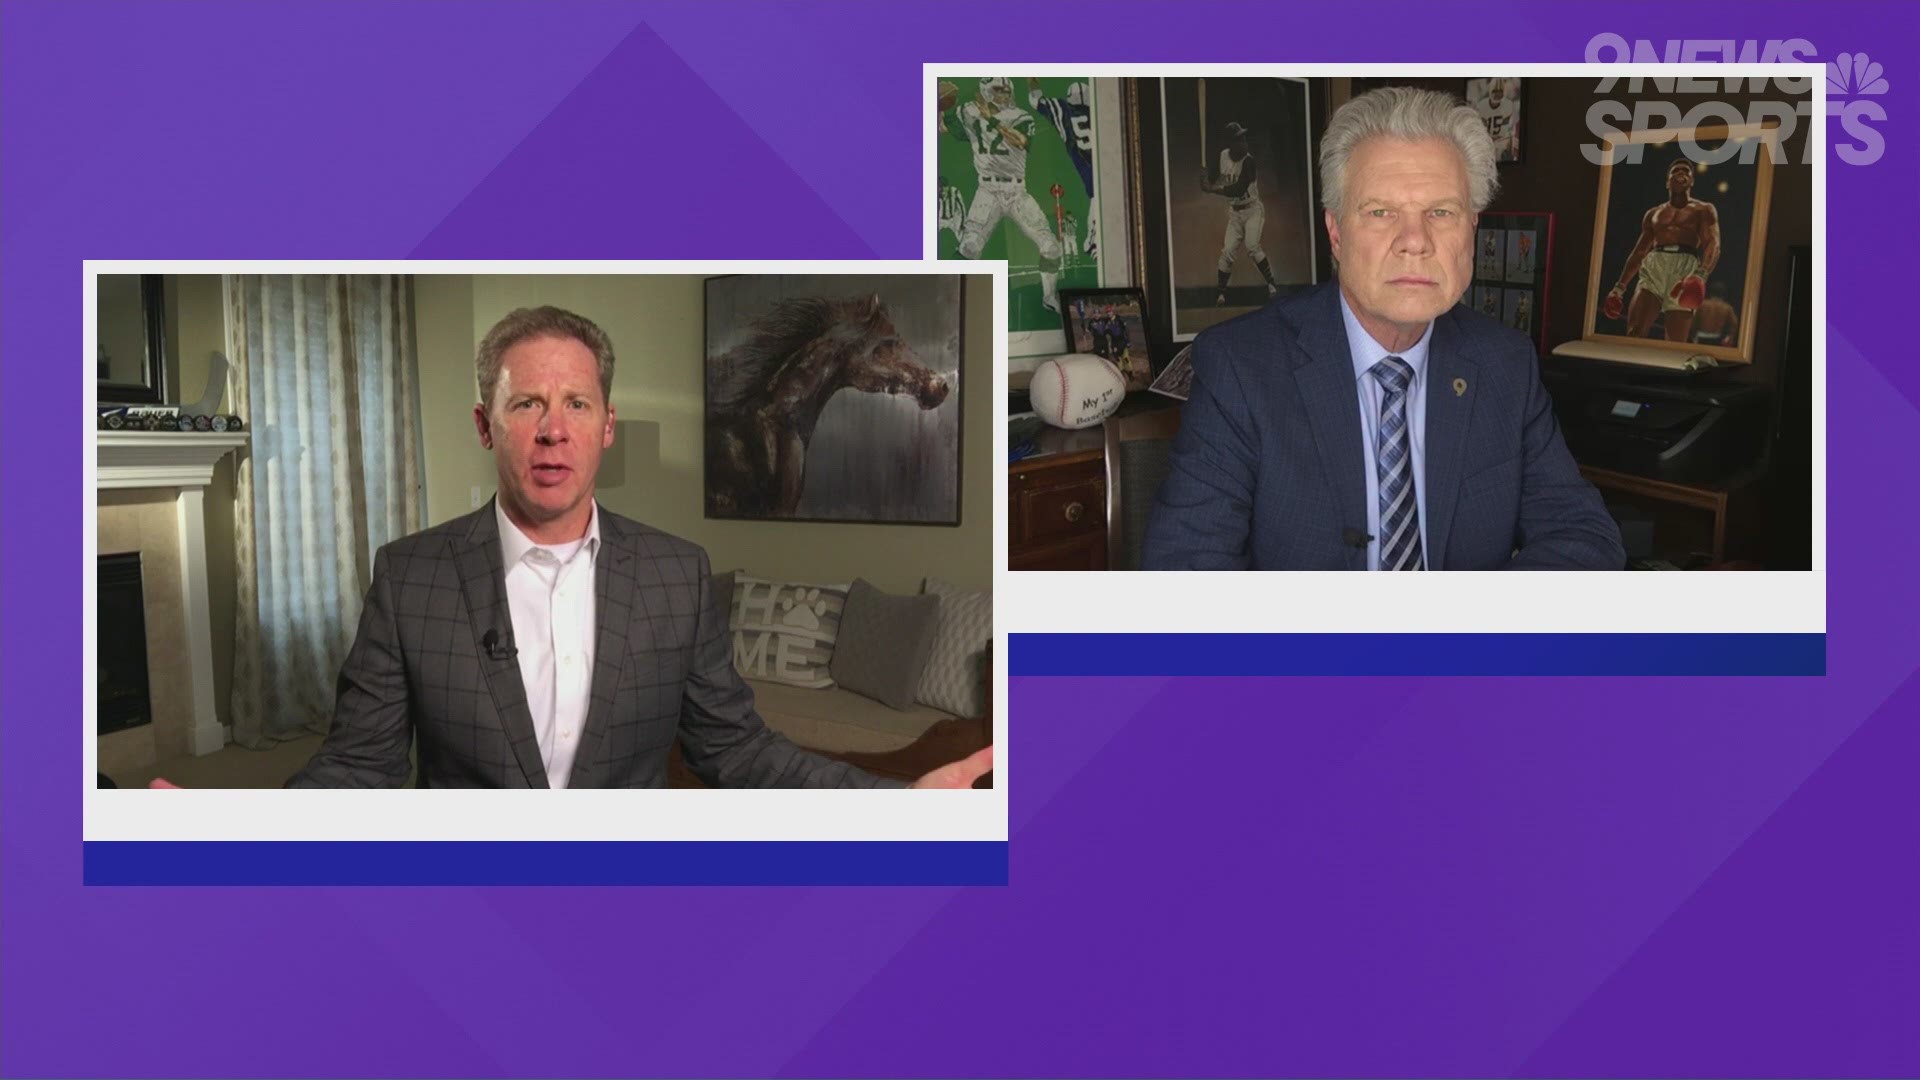 Mike Klis and Rod Mackey discuss the Broncos trade for Teddy Bridgewater, as well as the team's best and worst NFL draft picks.